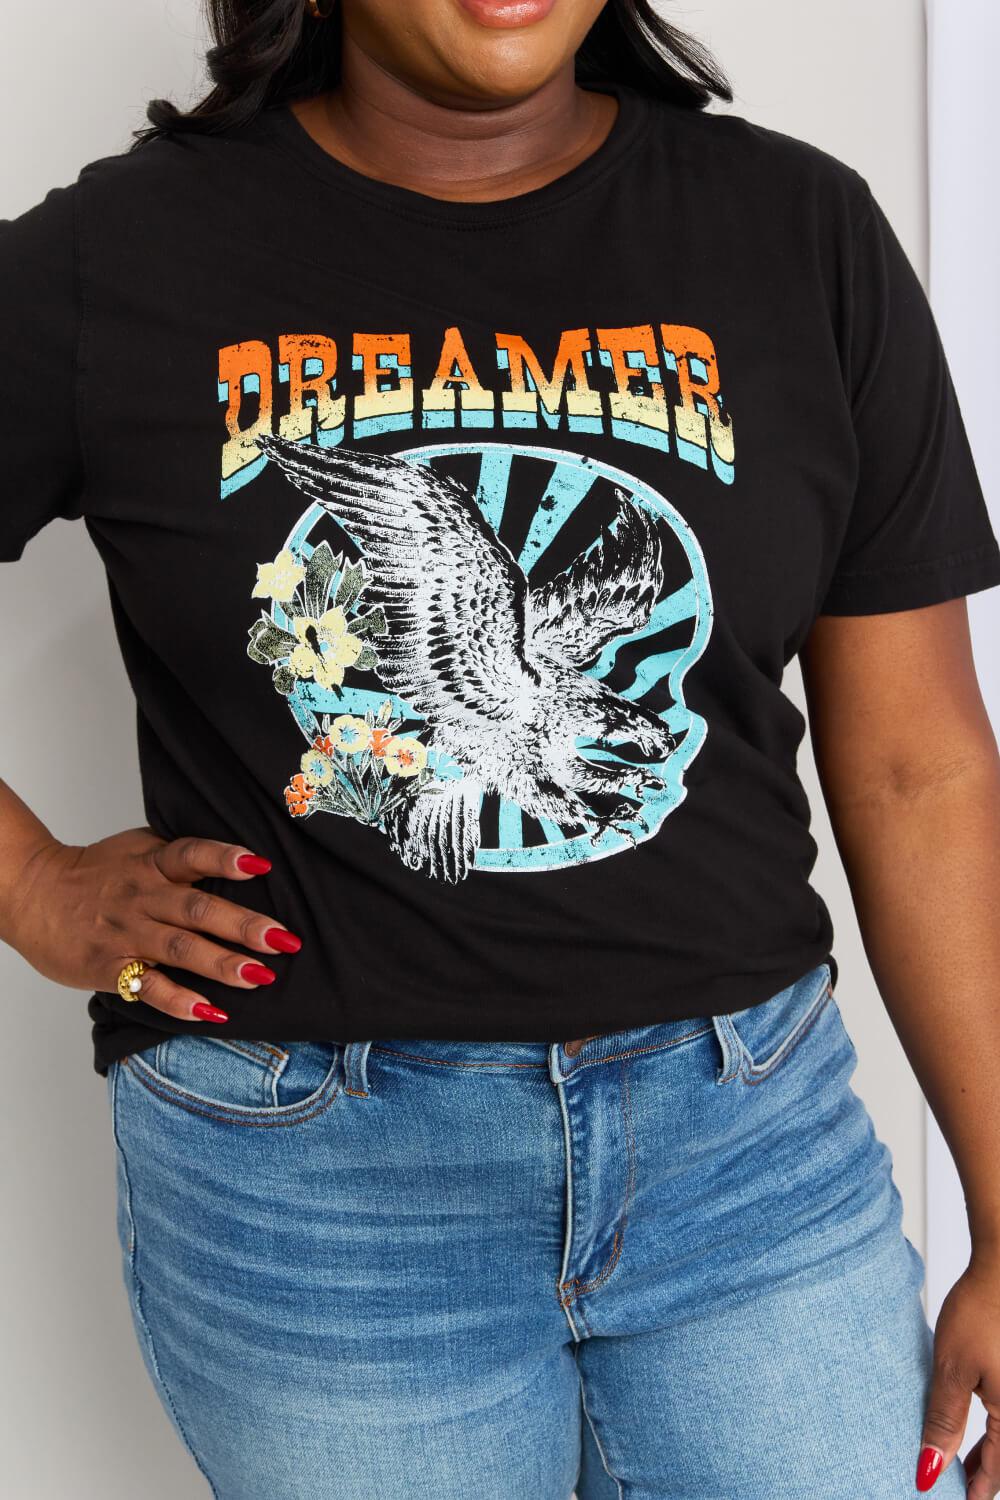 mineB Full Size DREAMER Graphic T-Shirt BLUE ZONE PLANET